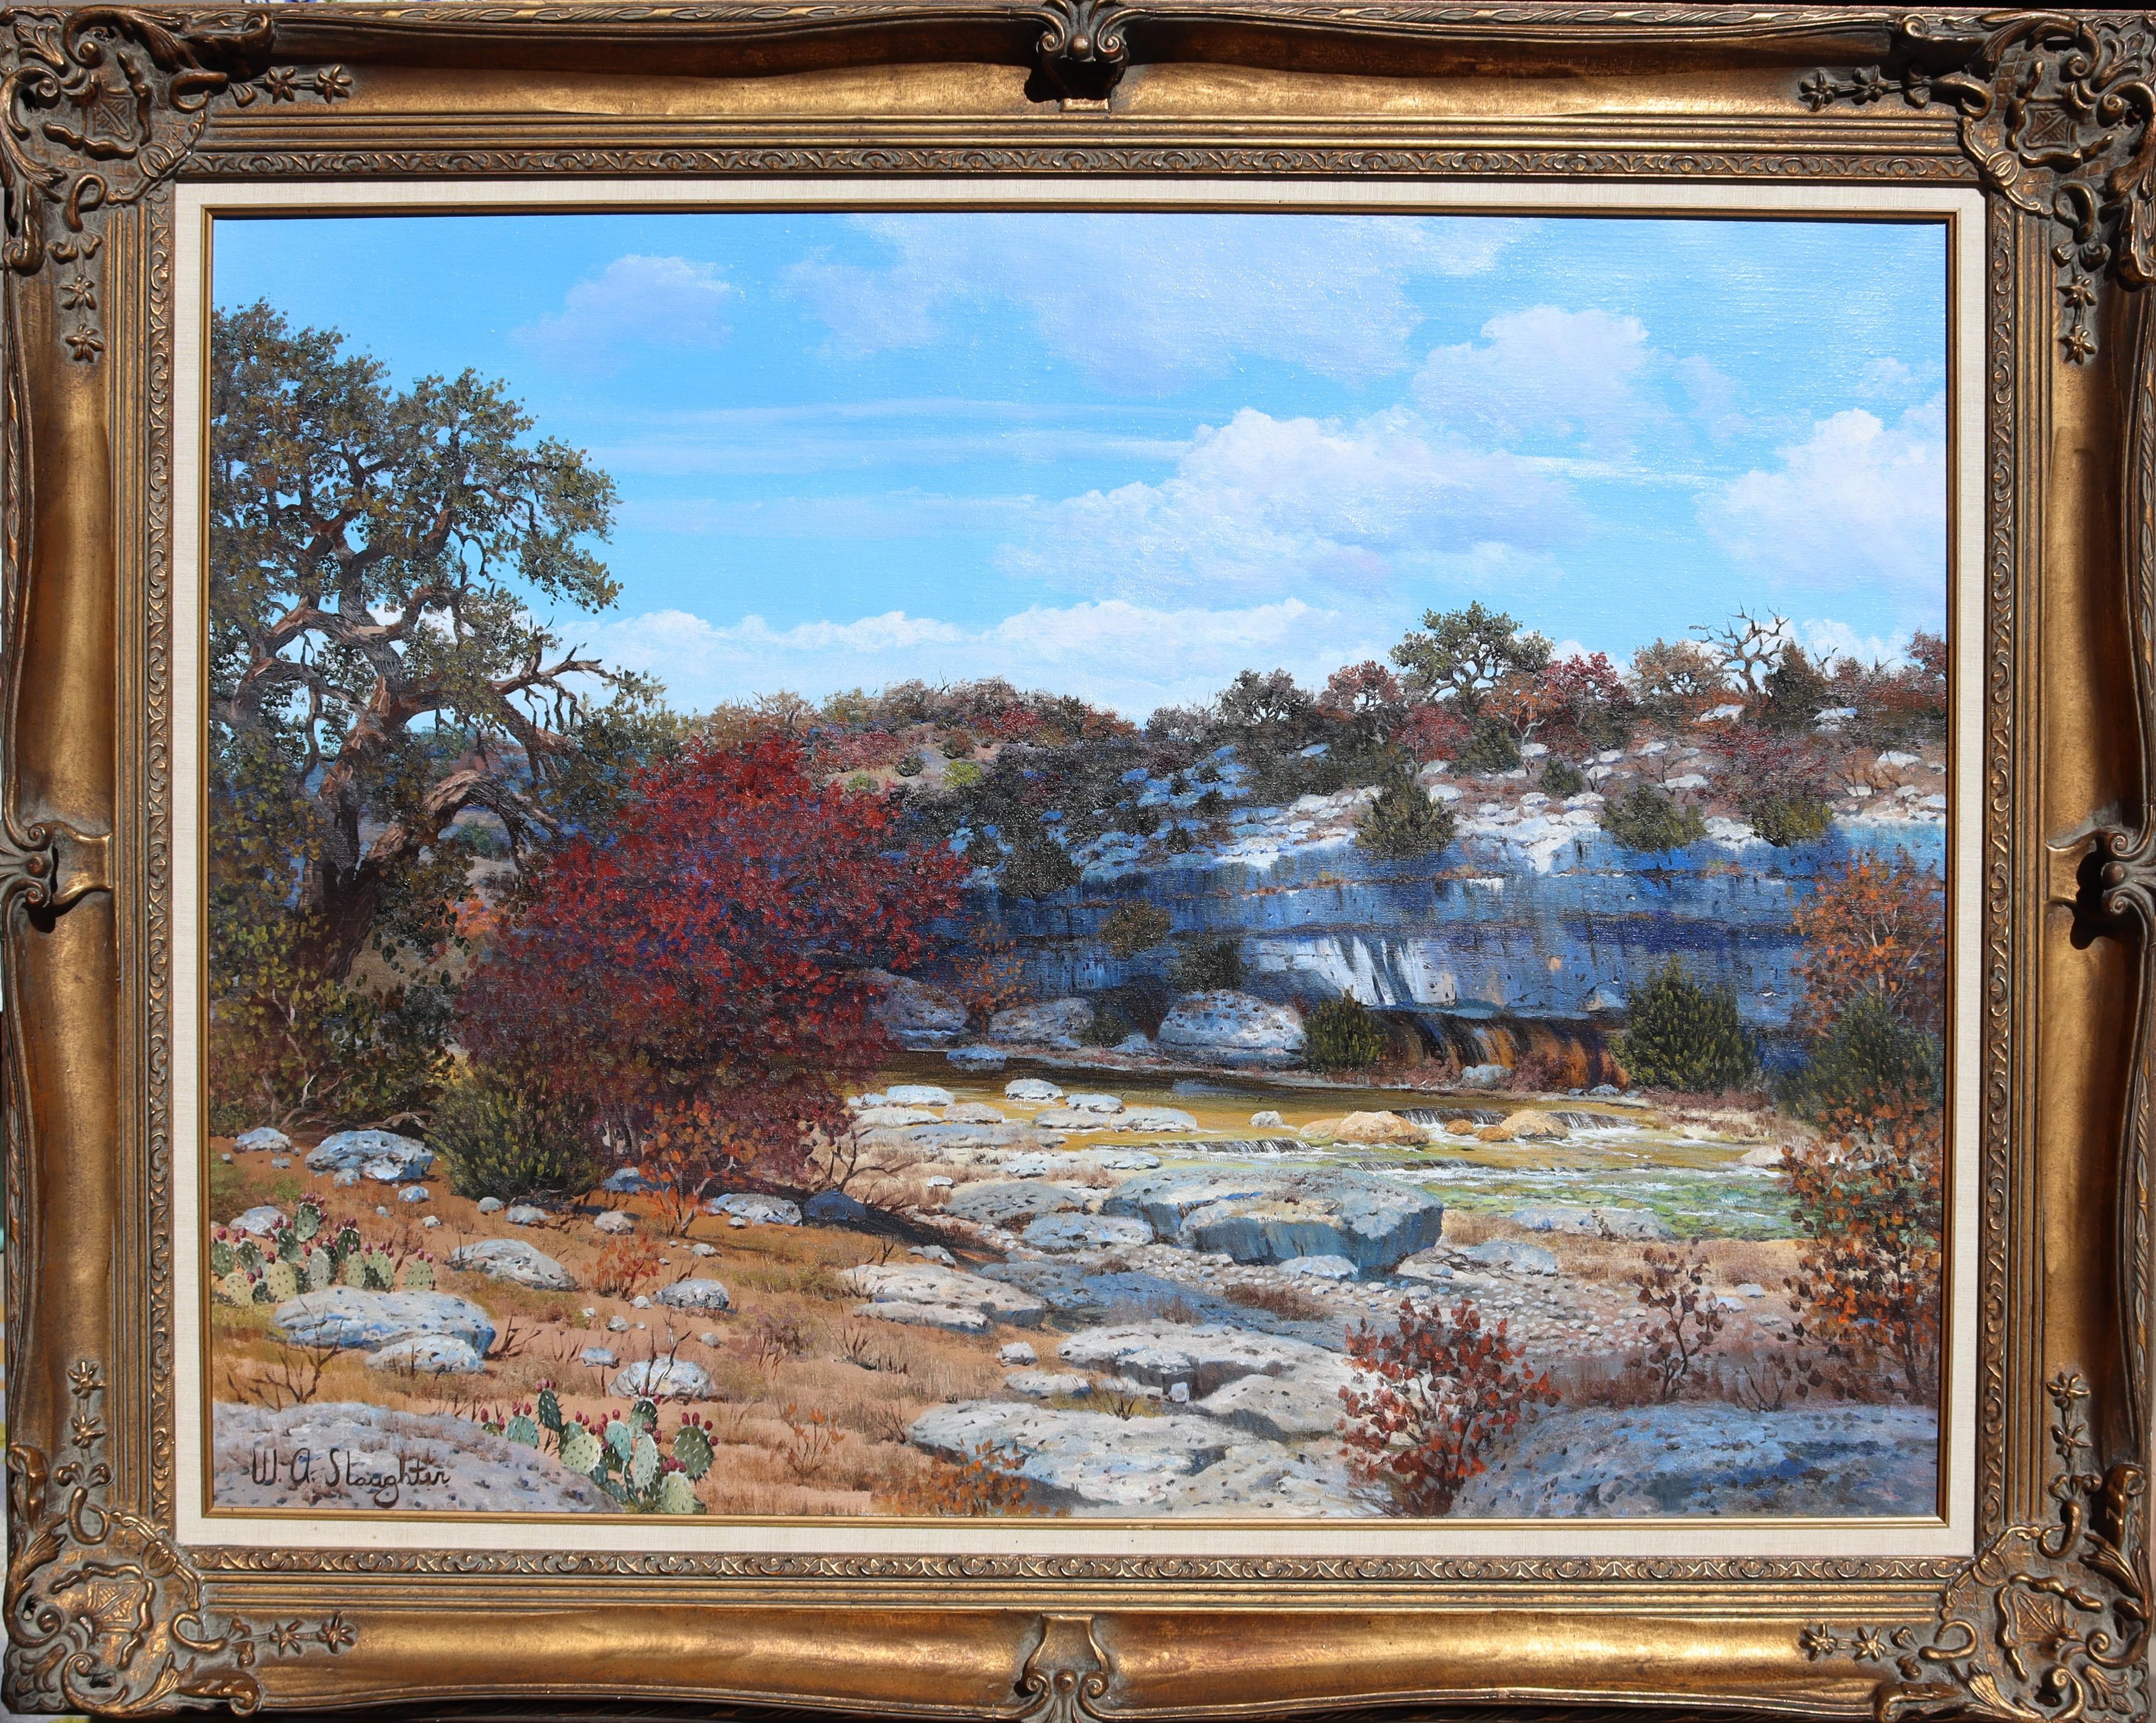 Autumn, Texas Landscape at the Bluff - Painting by William A. Slaughter